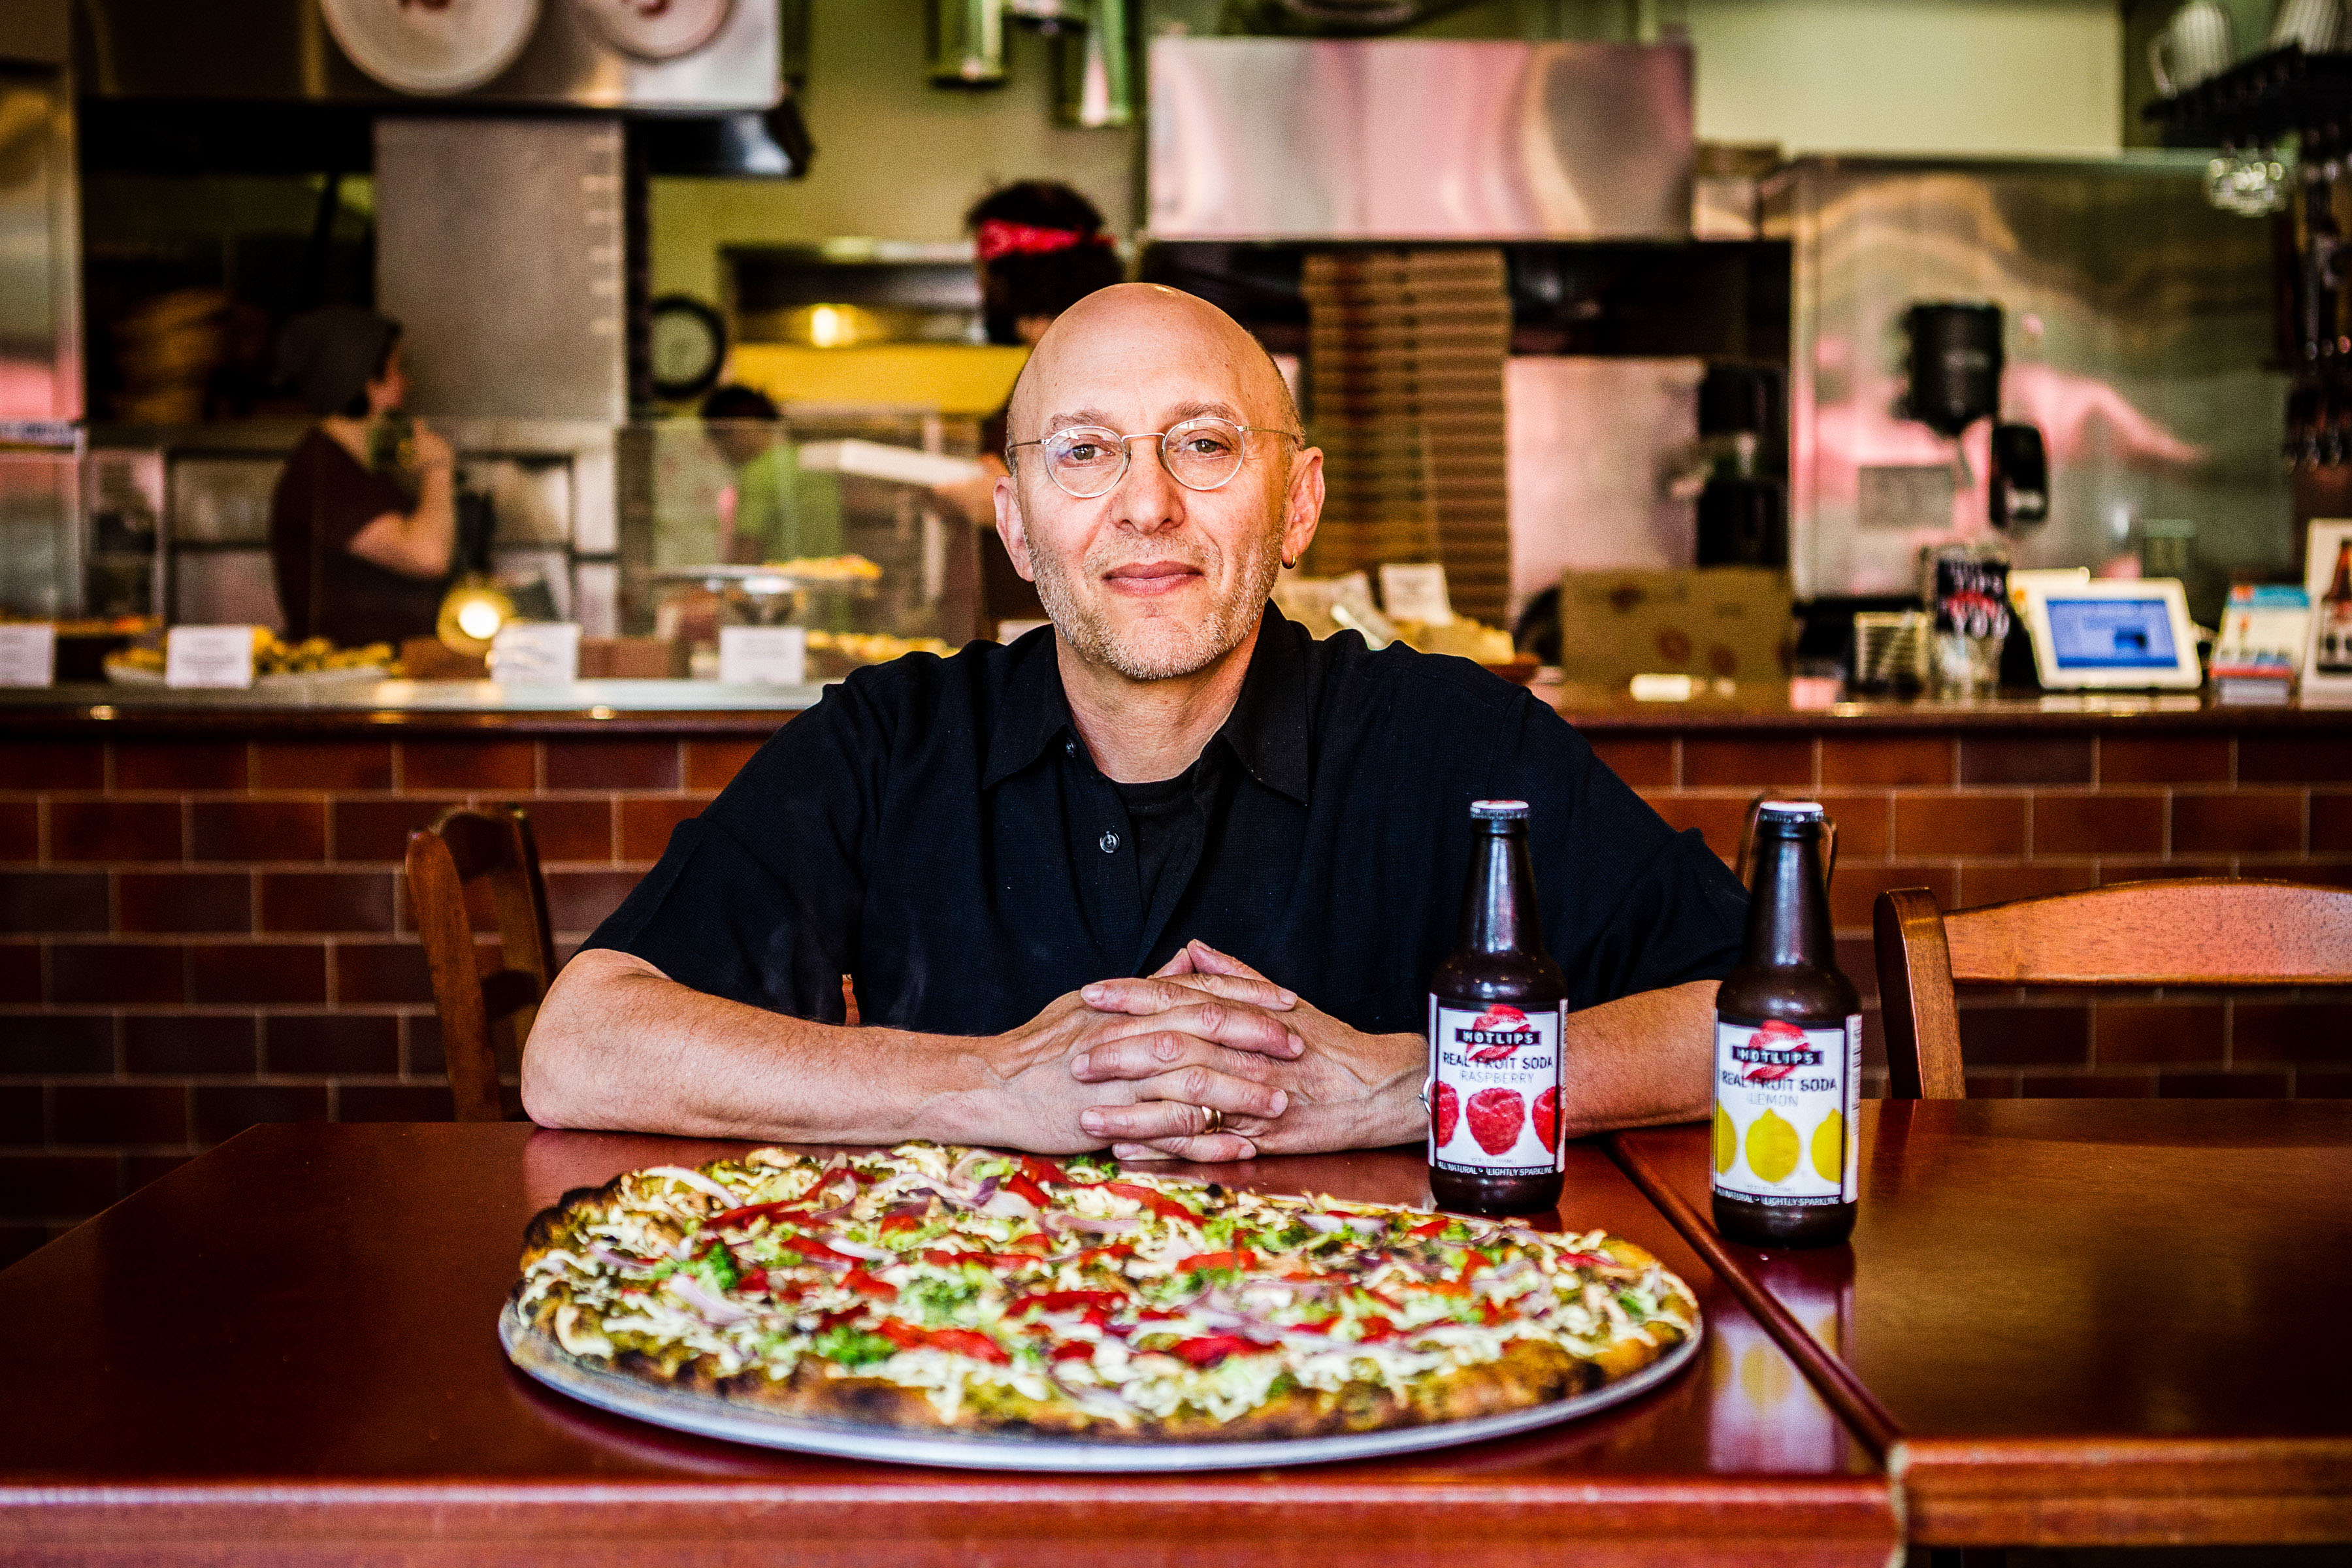 David Yudkin, Founder of Hot Lips Pizza pictured behind pizza pie